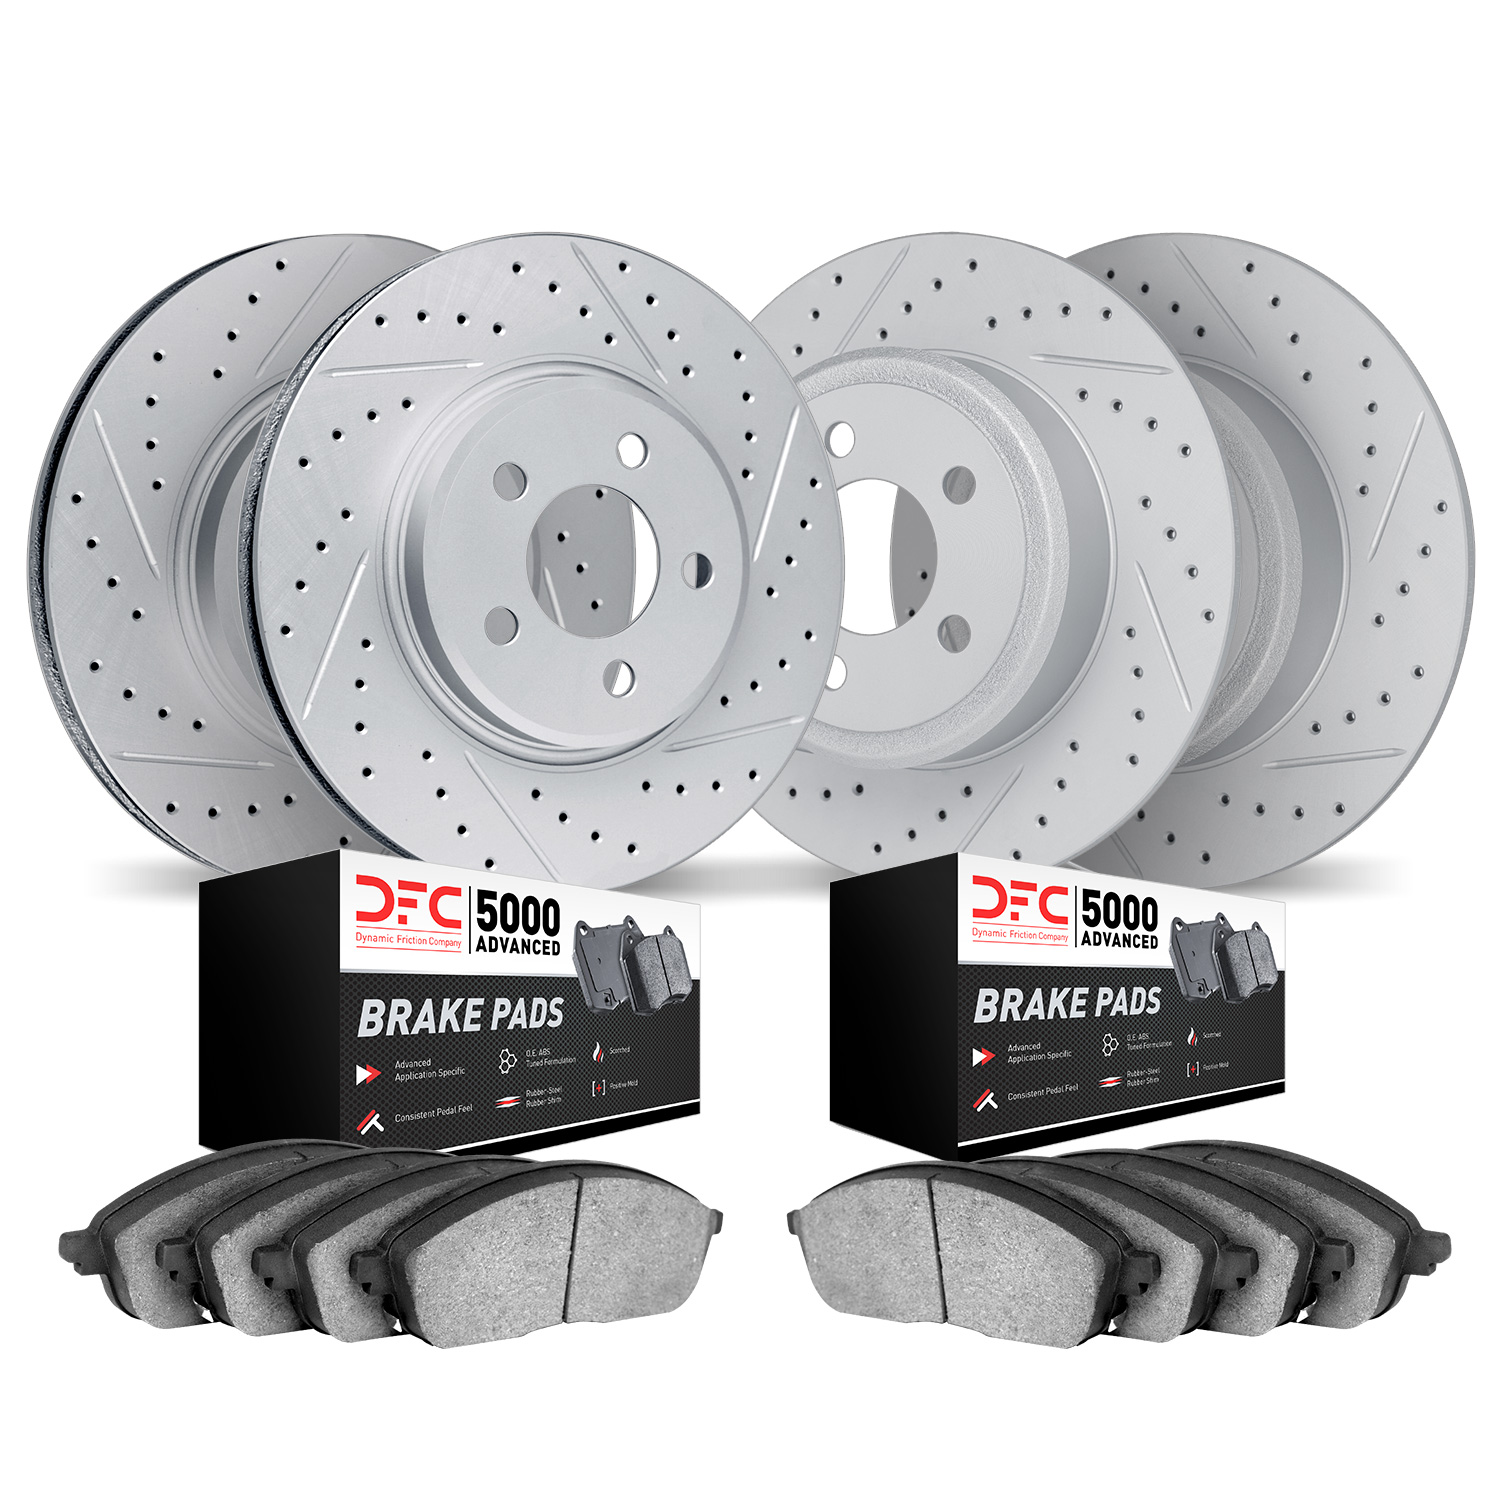 2504-80036 Geoperformance Drilled/Slotted Rotors w/5000 Advanced Brake Pads Kit, 2013-2015 Ford/Lincoln/Mercury/Mazda, Position: